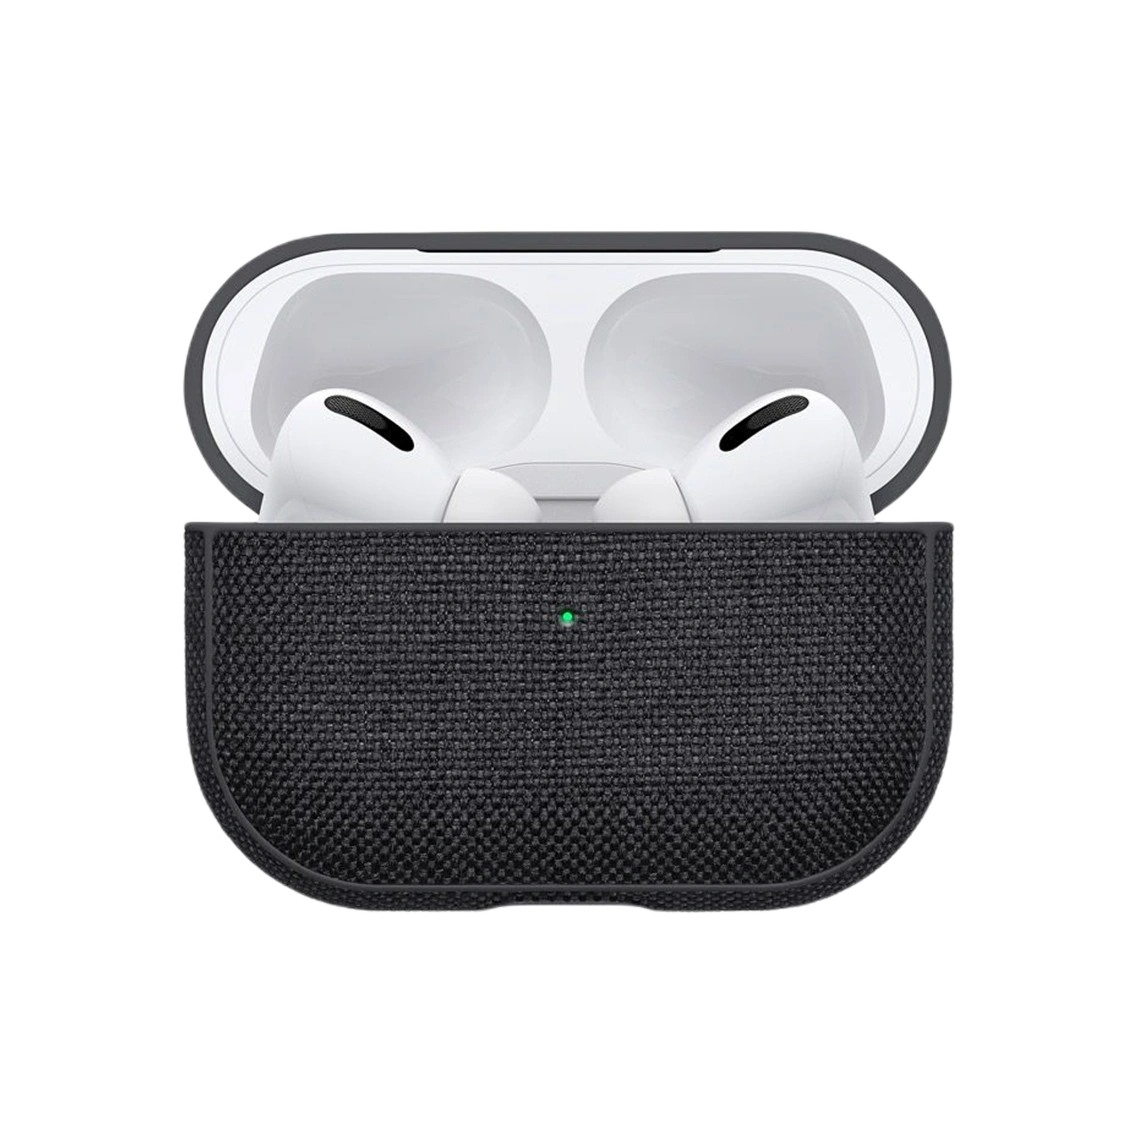 oxford-protective-case-for-airpods-pro